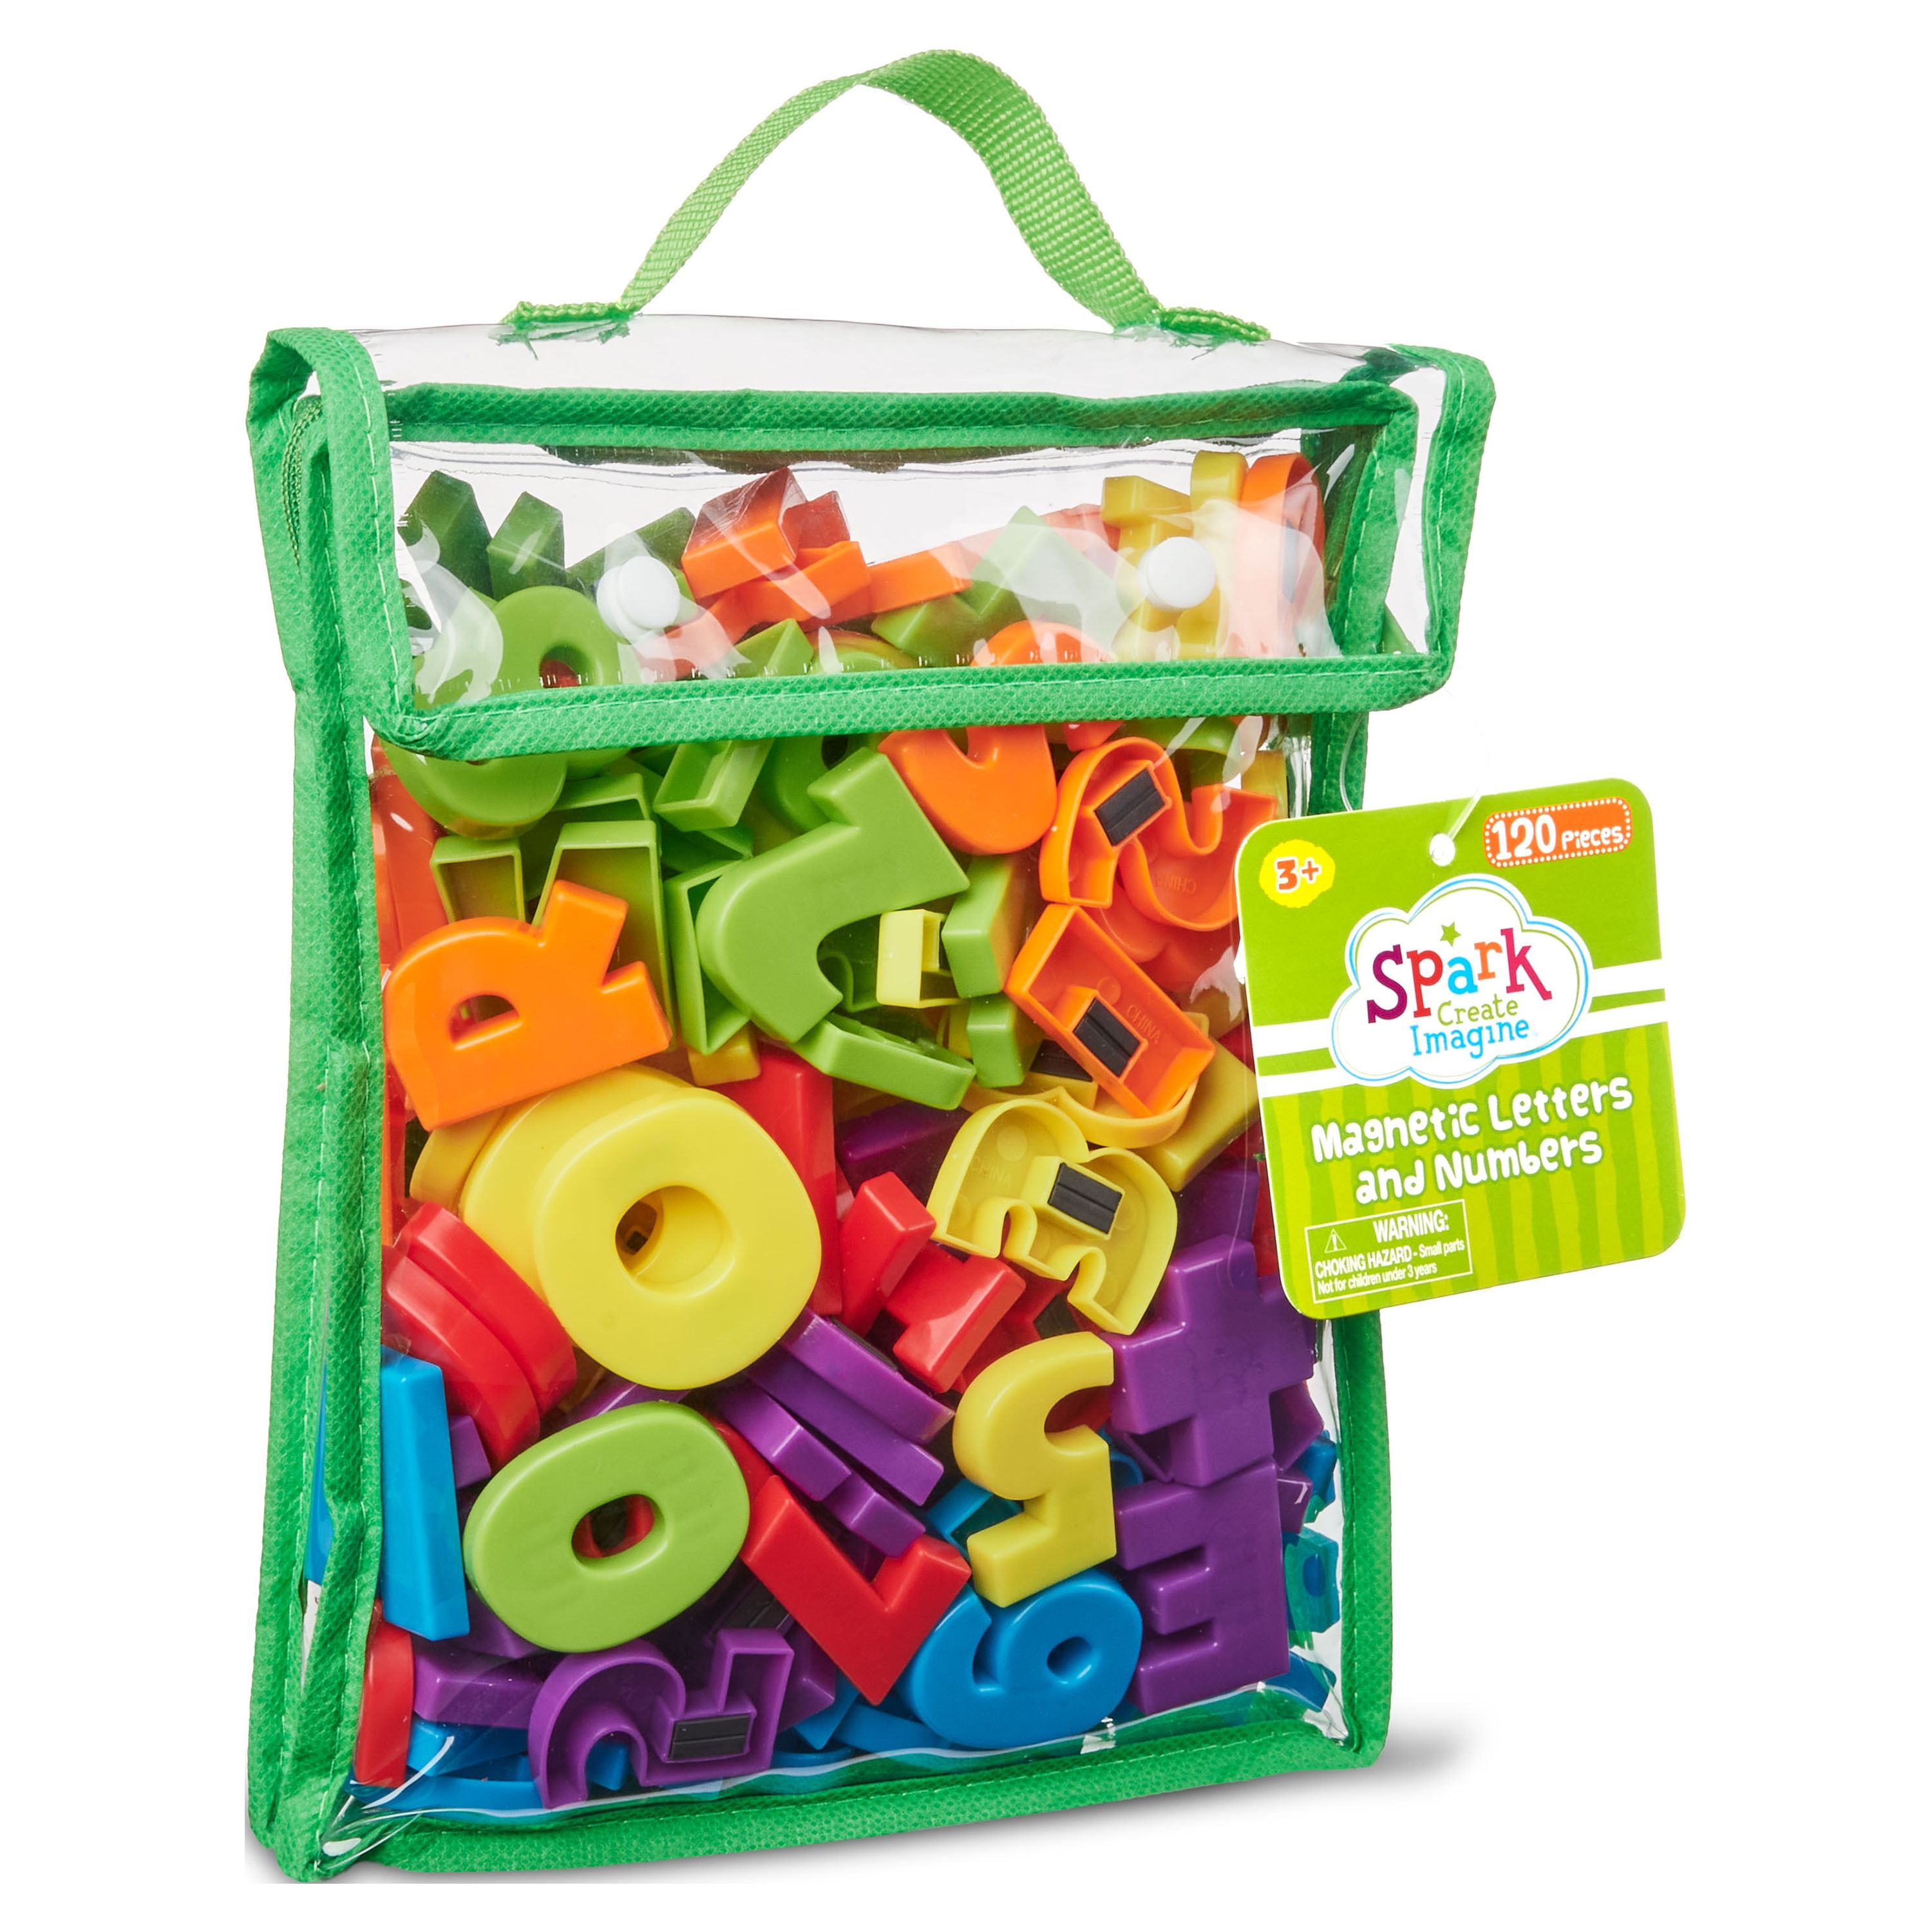 Spark Create Imagine Magnetic Letters and Numbers, 120 Pieces - image 2 of 4